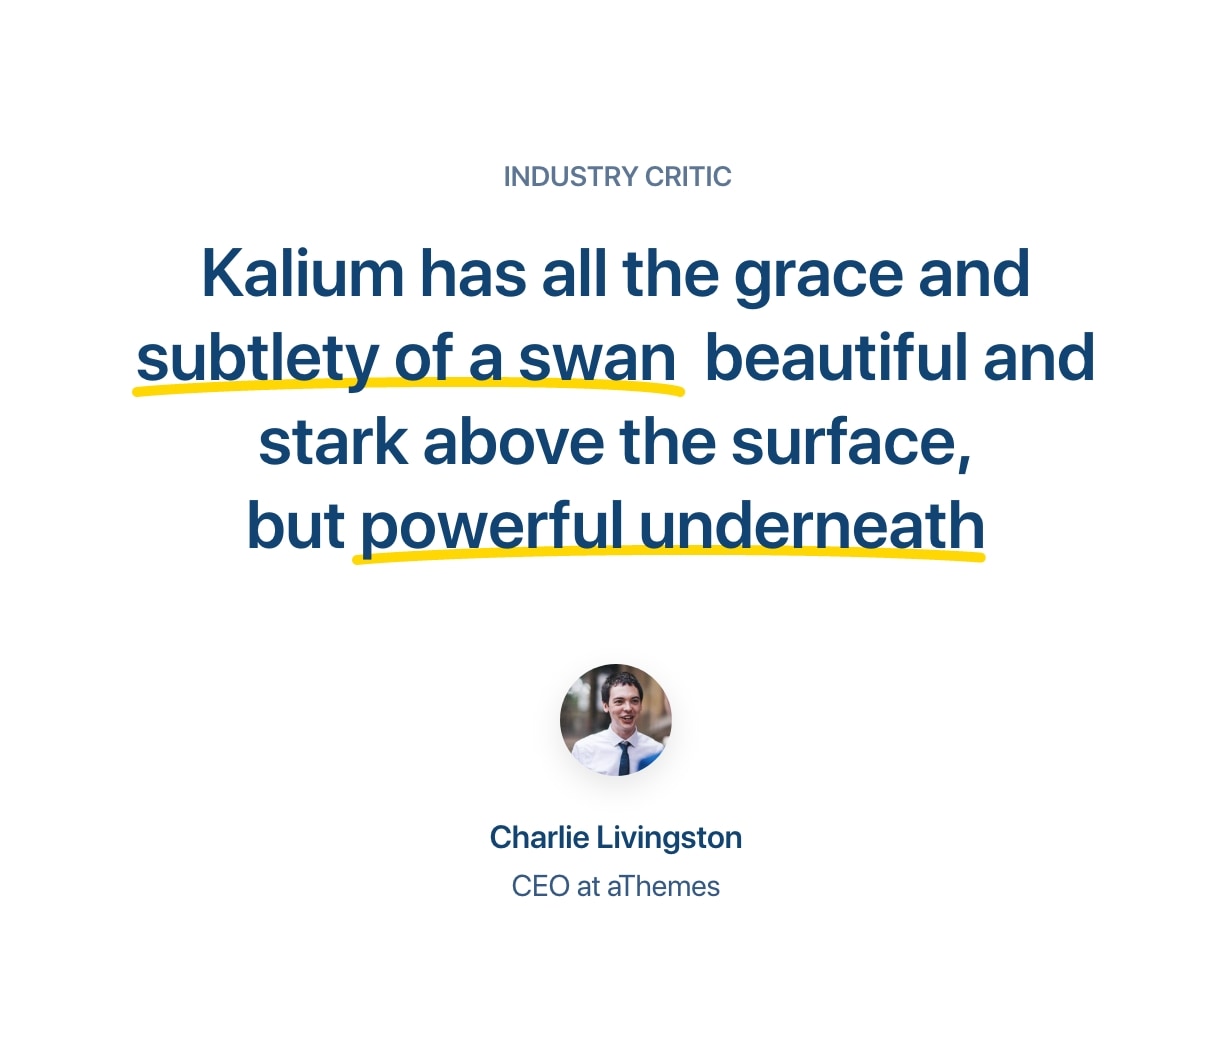 Kalium has all the grace and subtlety of a swan.